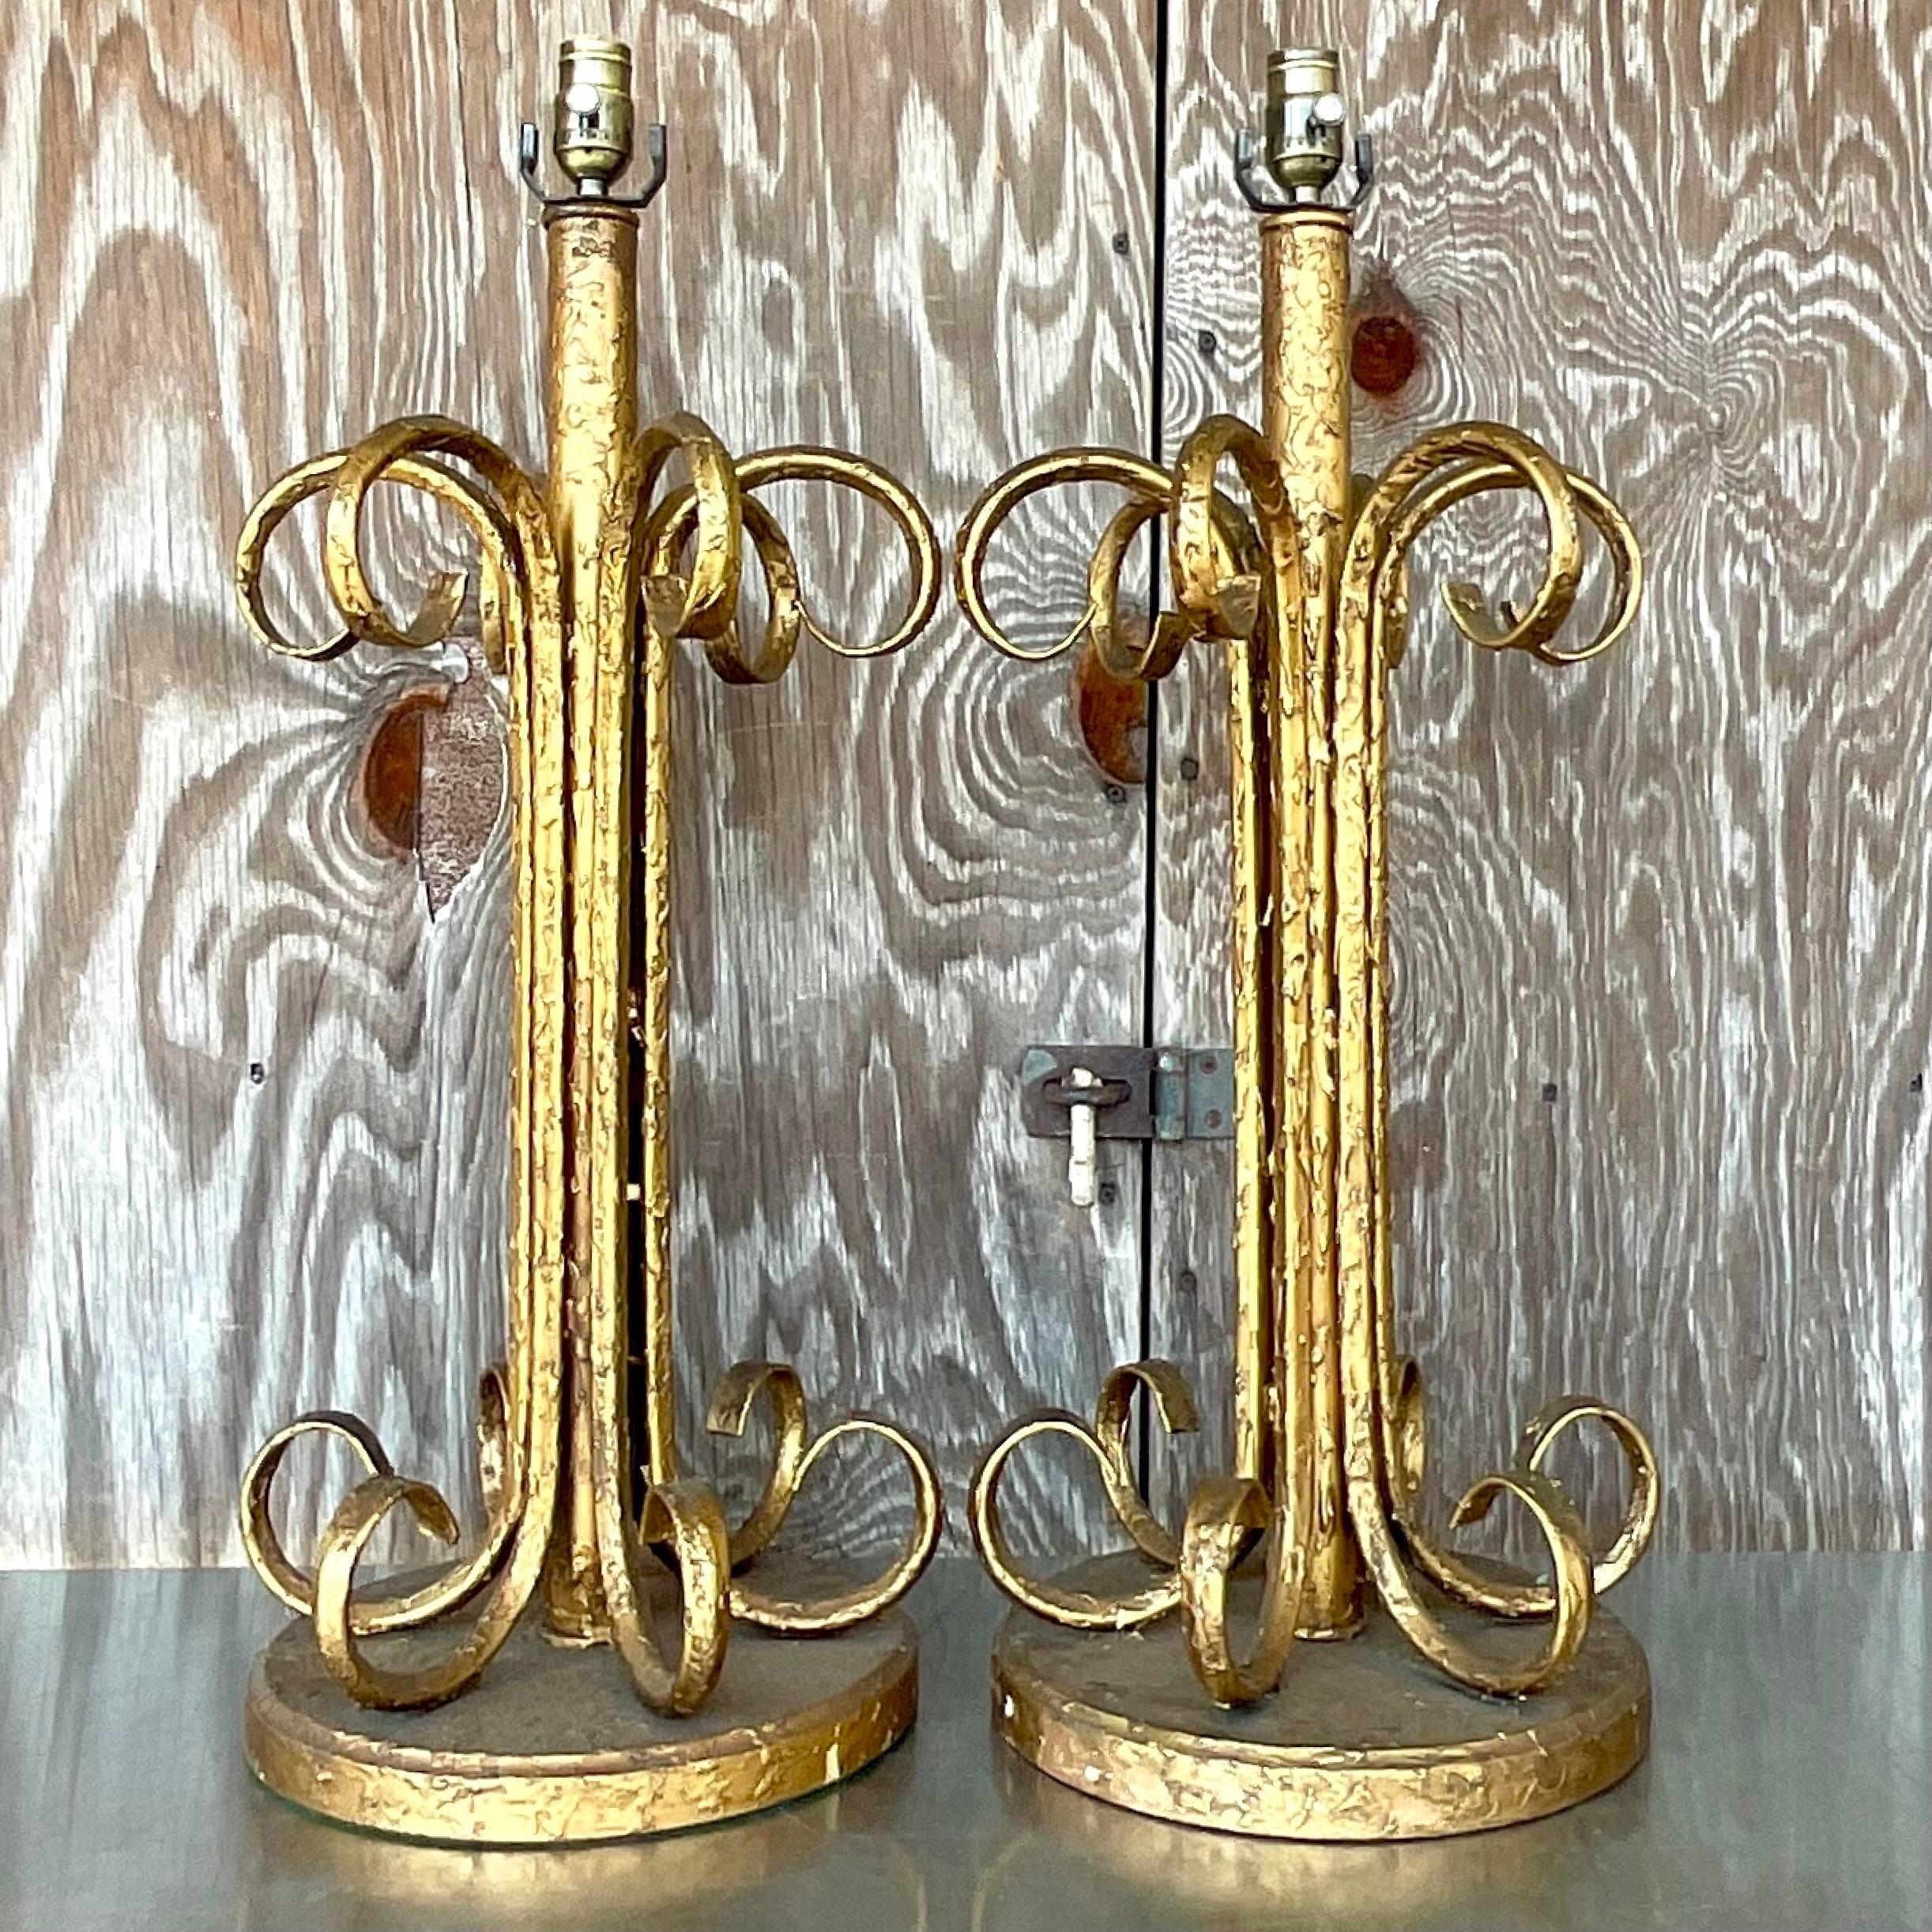 North American Vintage Boho Gilt Scroll Lamps - a Pair For Sale